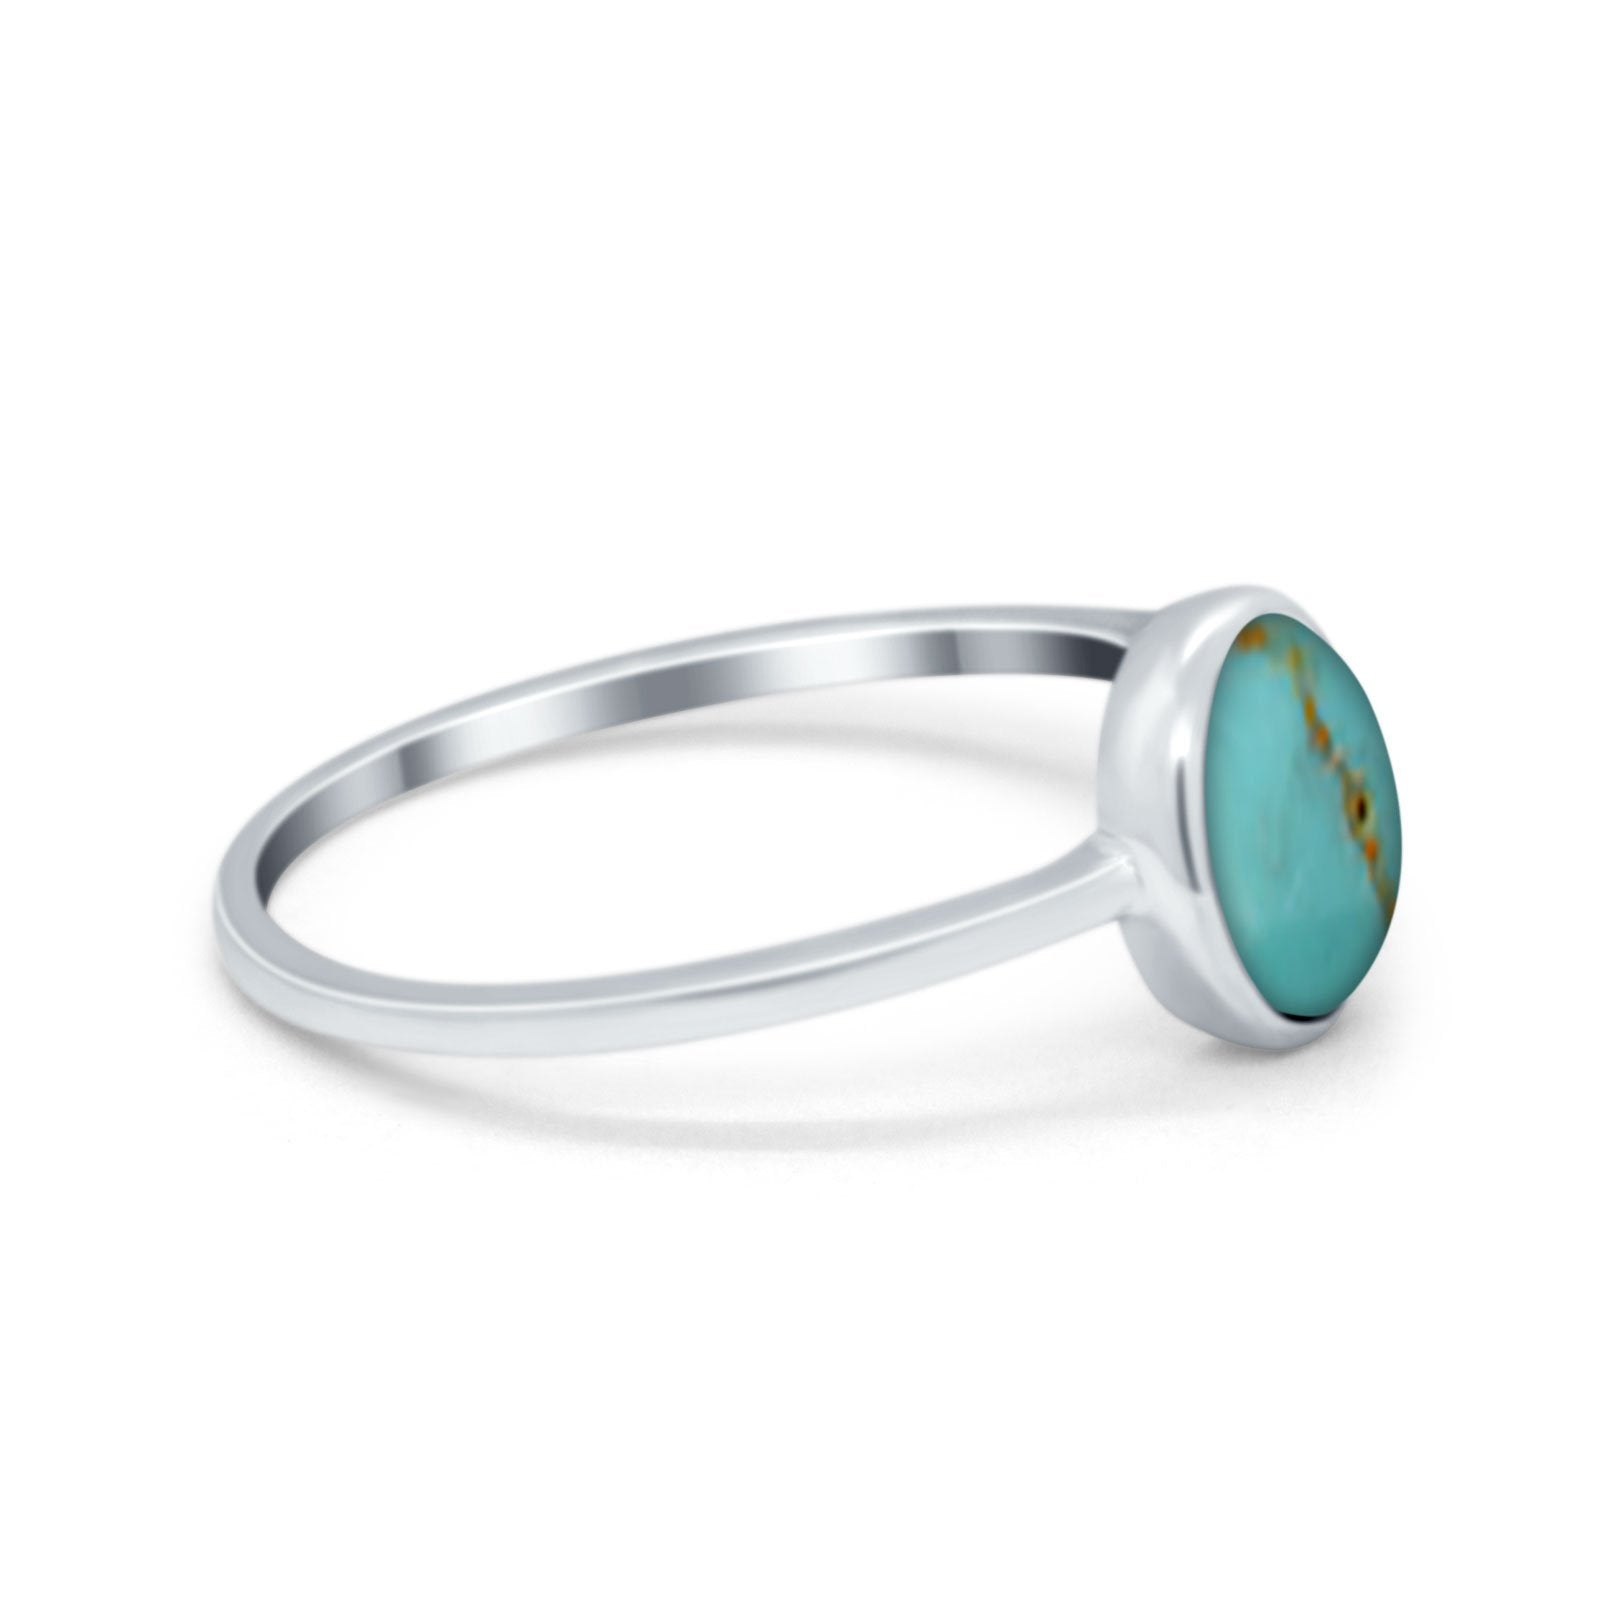 Solitaire Oval Thumb Ring Simulated Turquoise CZ Stone 925 Sterling Silver